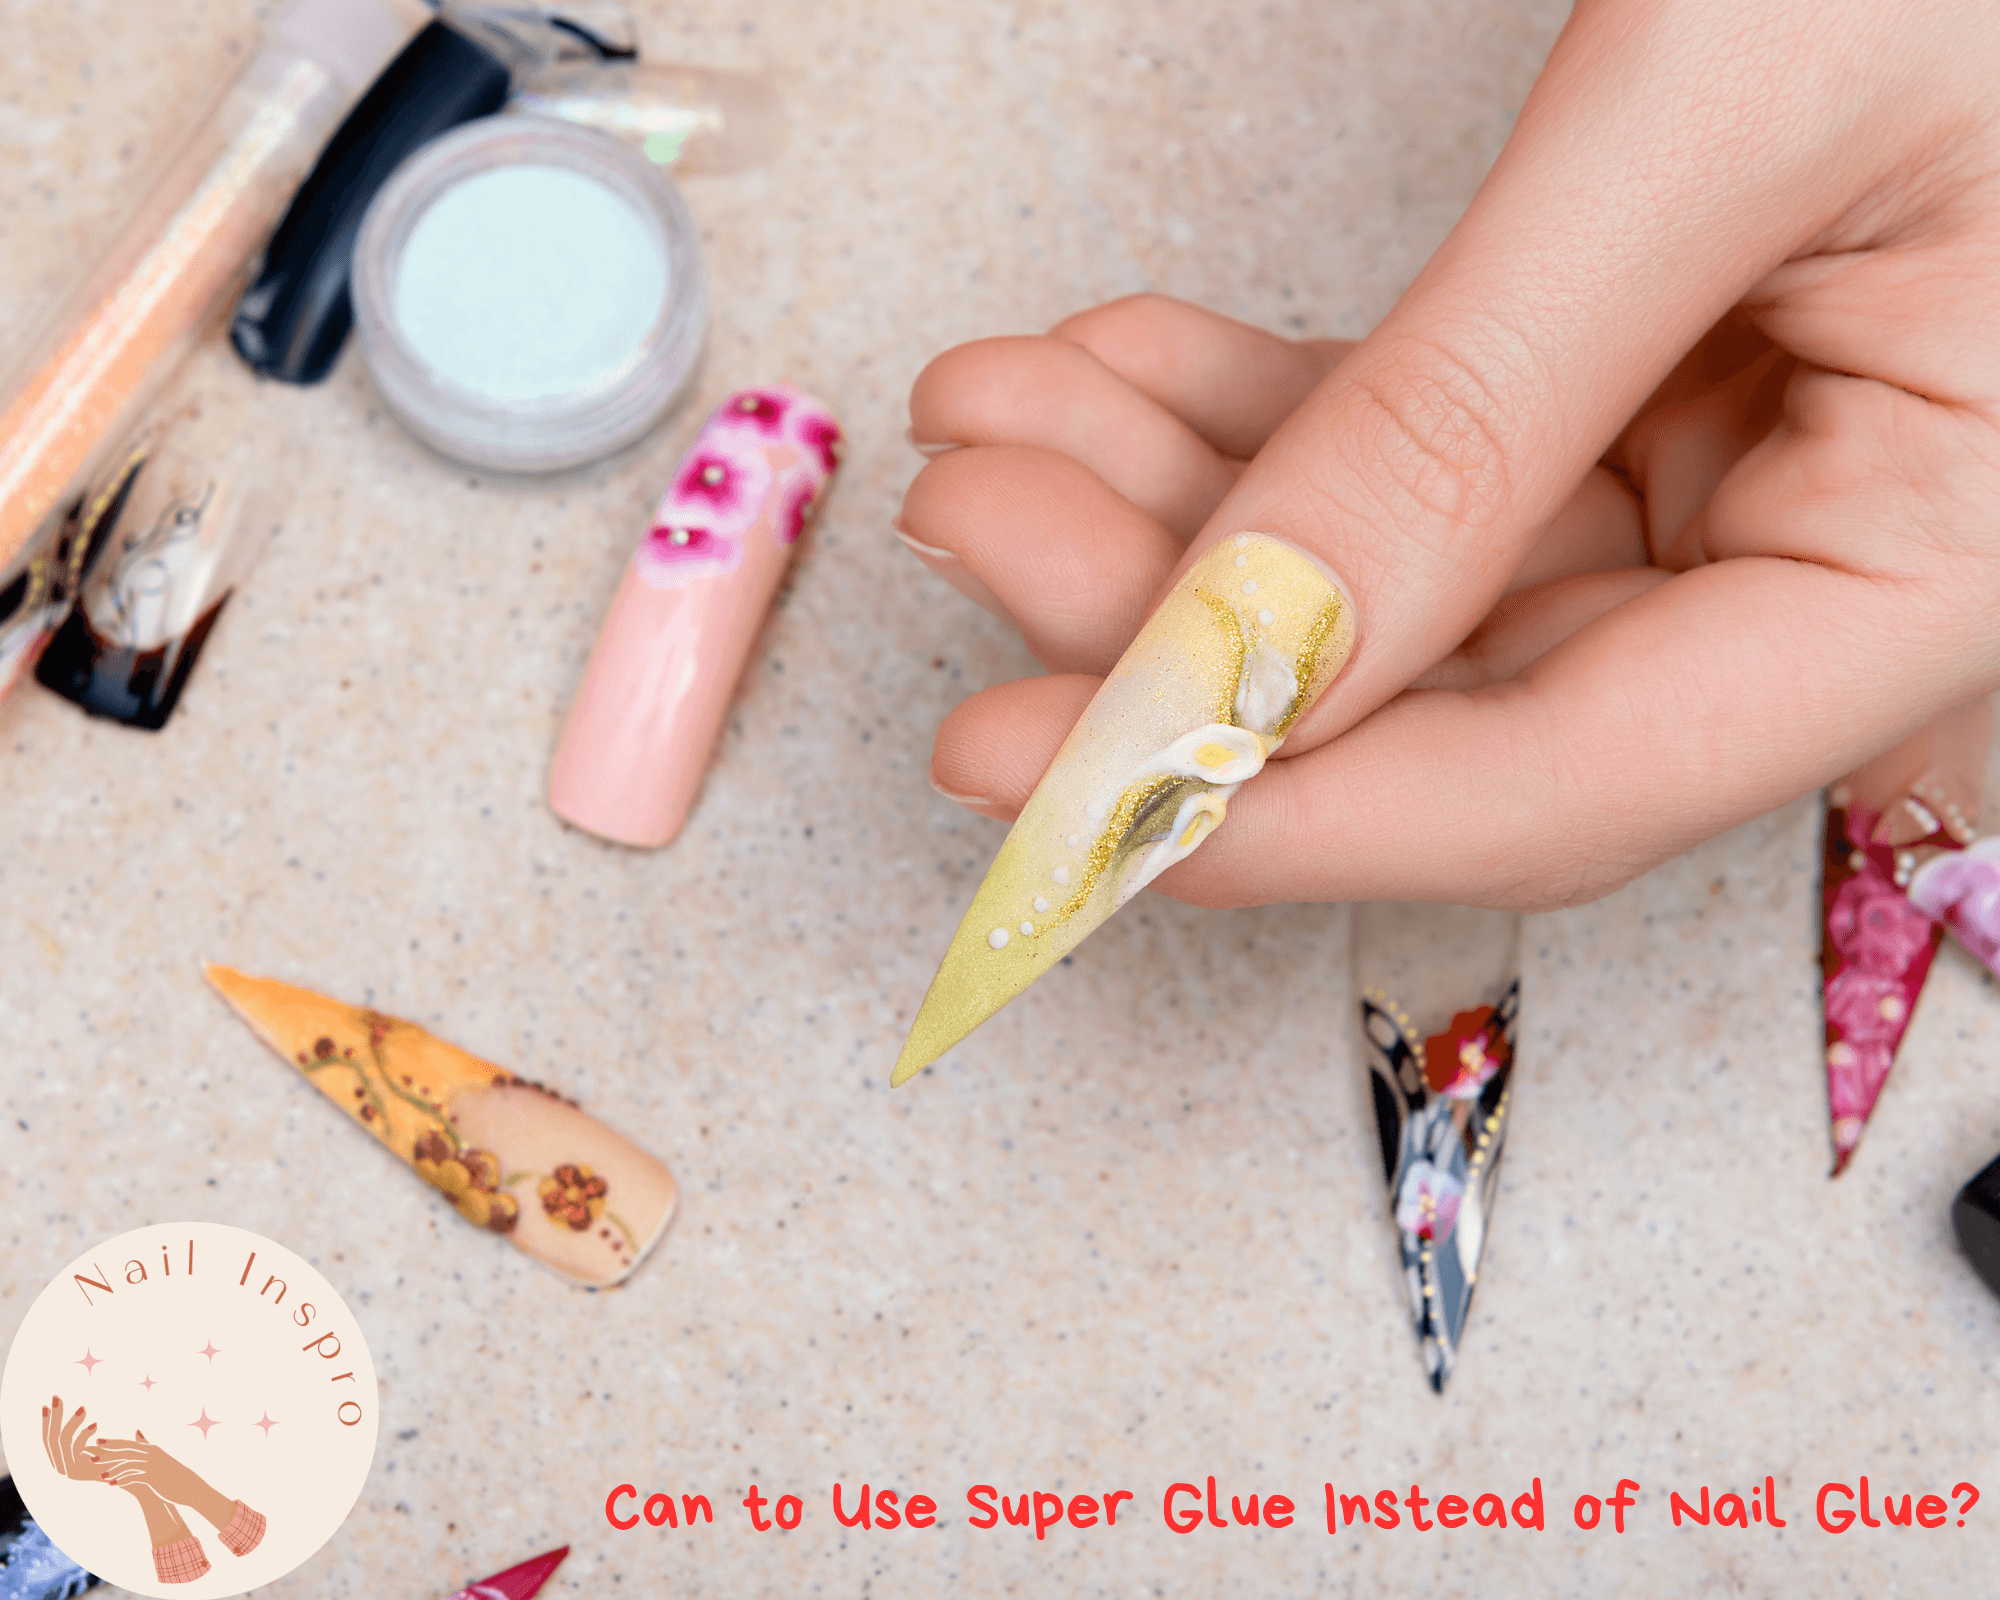 What is the best glue for a press on nails? - Quora